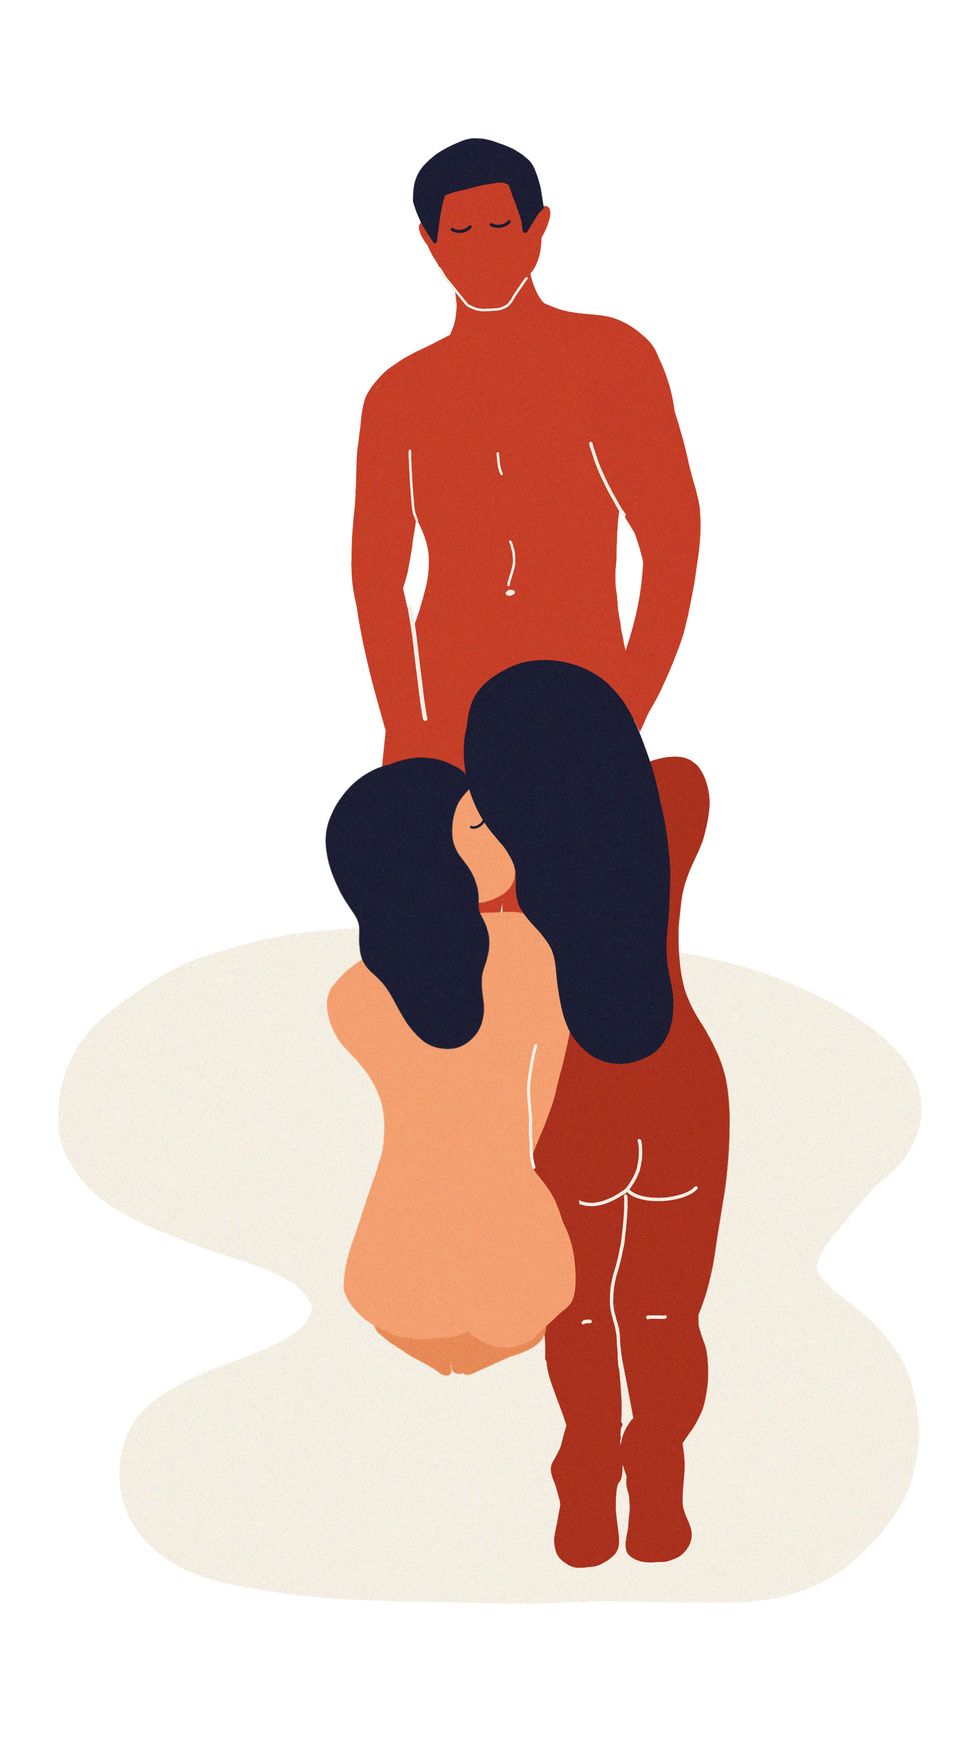 10 Threesome Sex Positions That Are Super Hot and Totally Doable